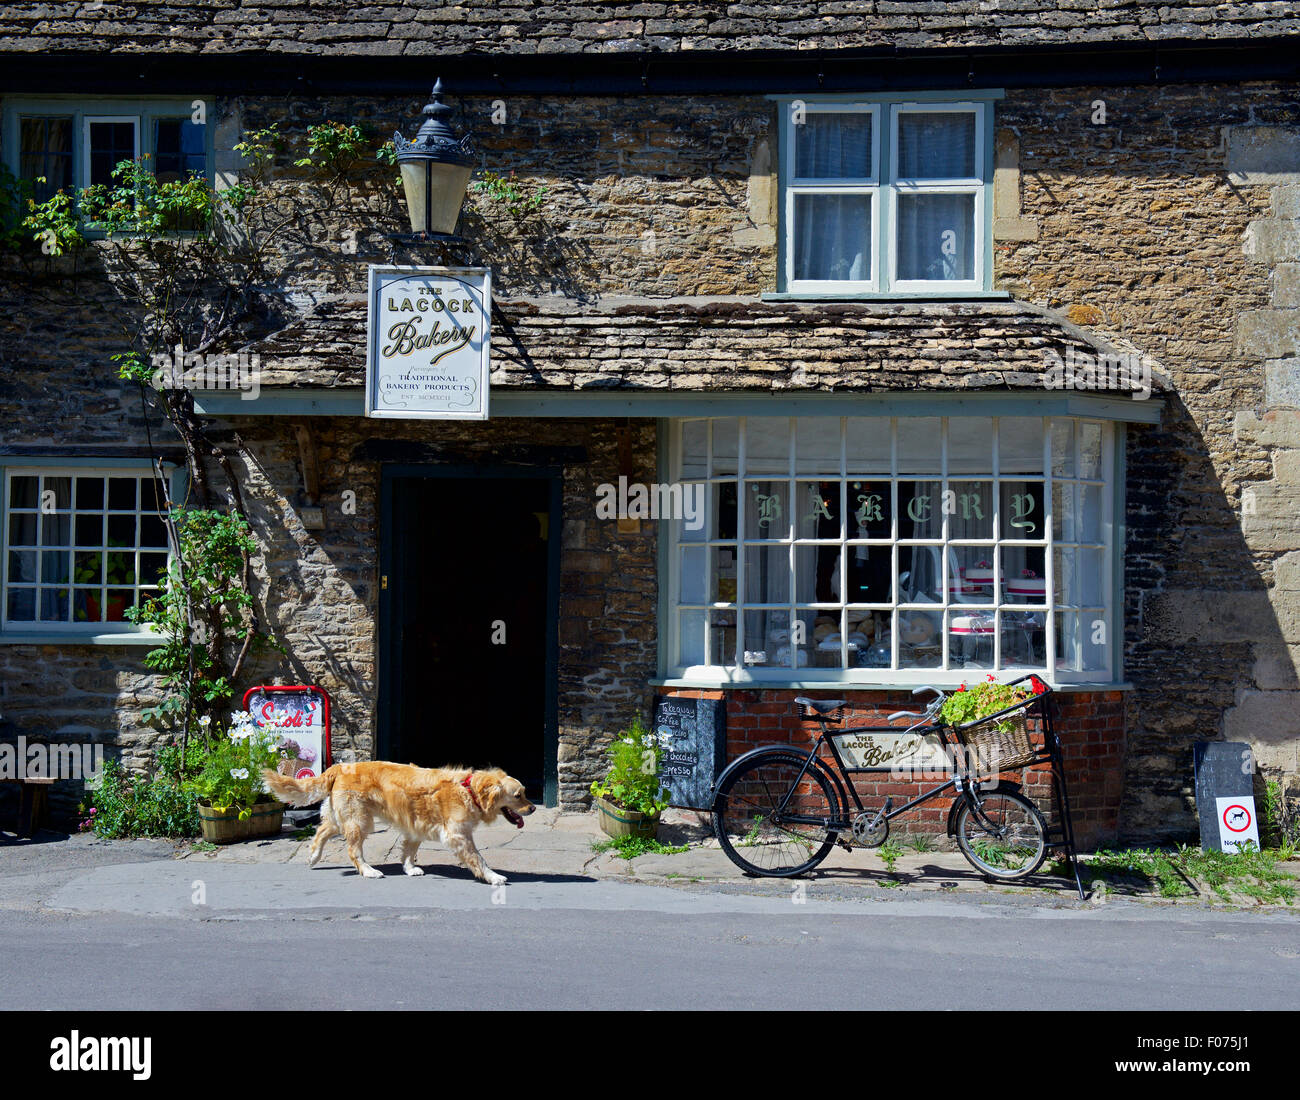 Dog walking past shop, the Lacock Bakery, in the village of Lacock, Wiltshire, England Stock Photo